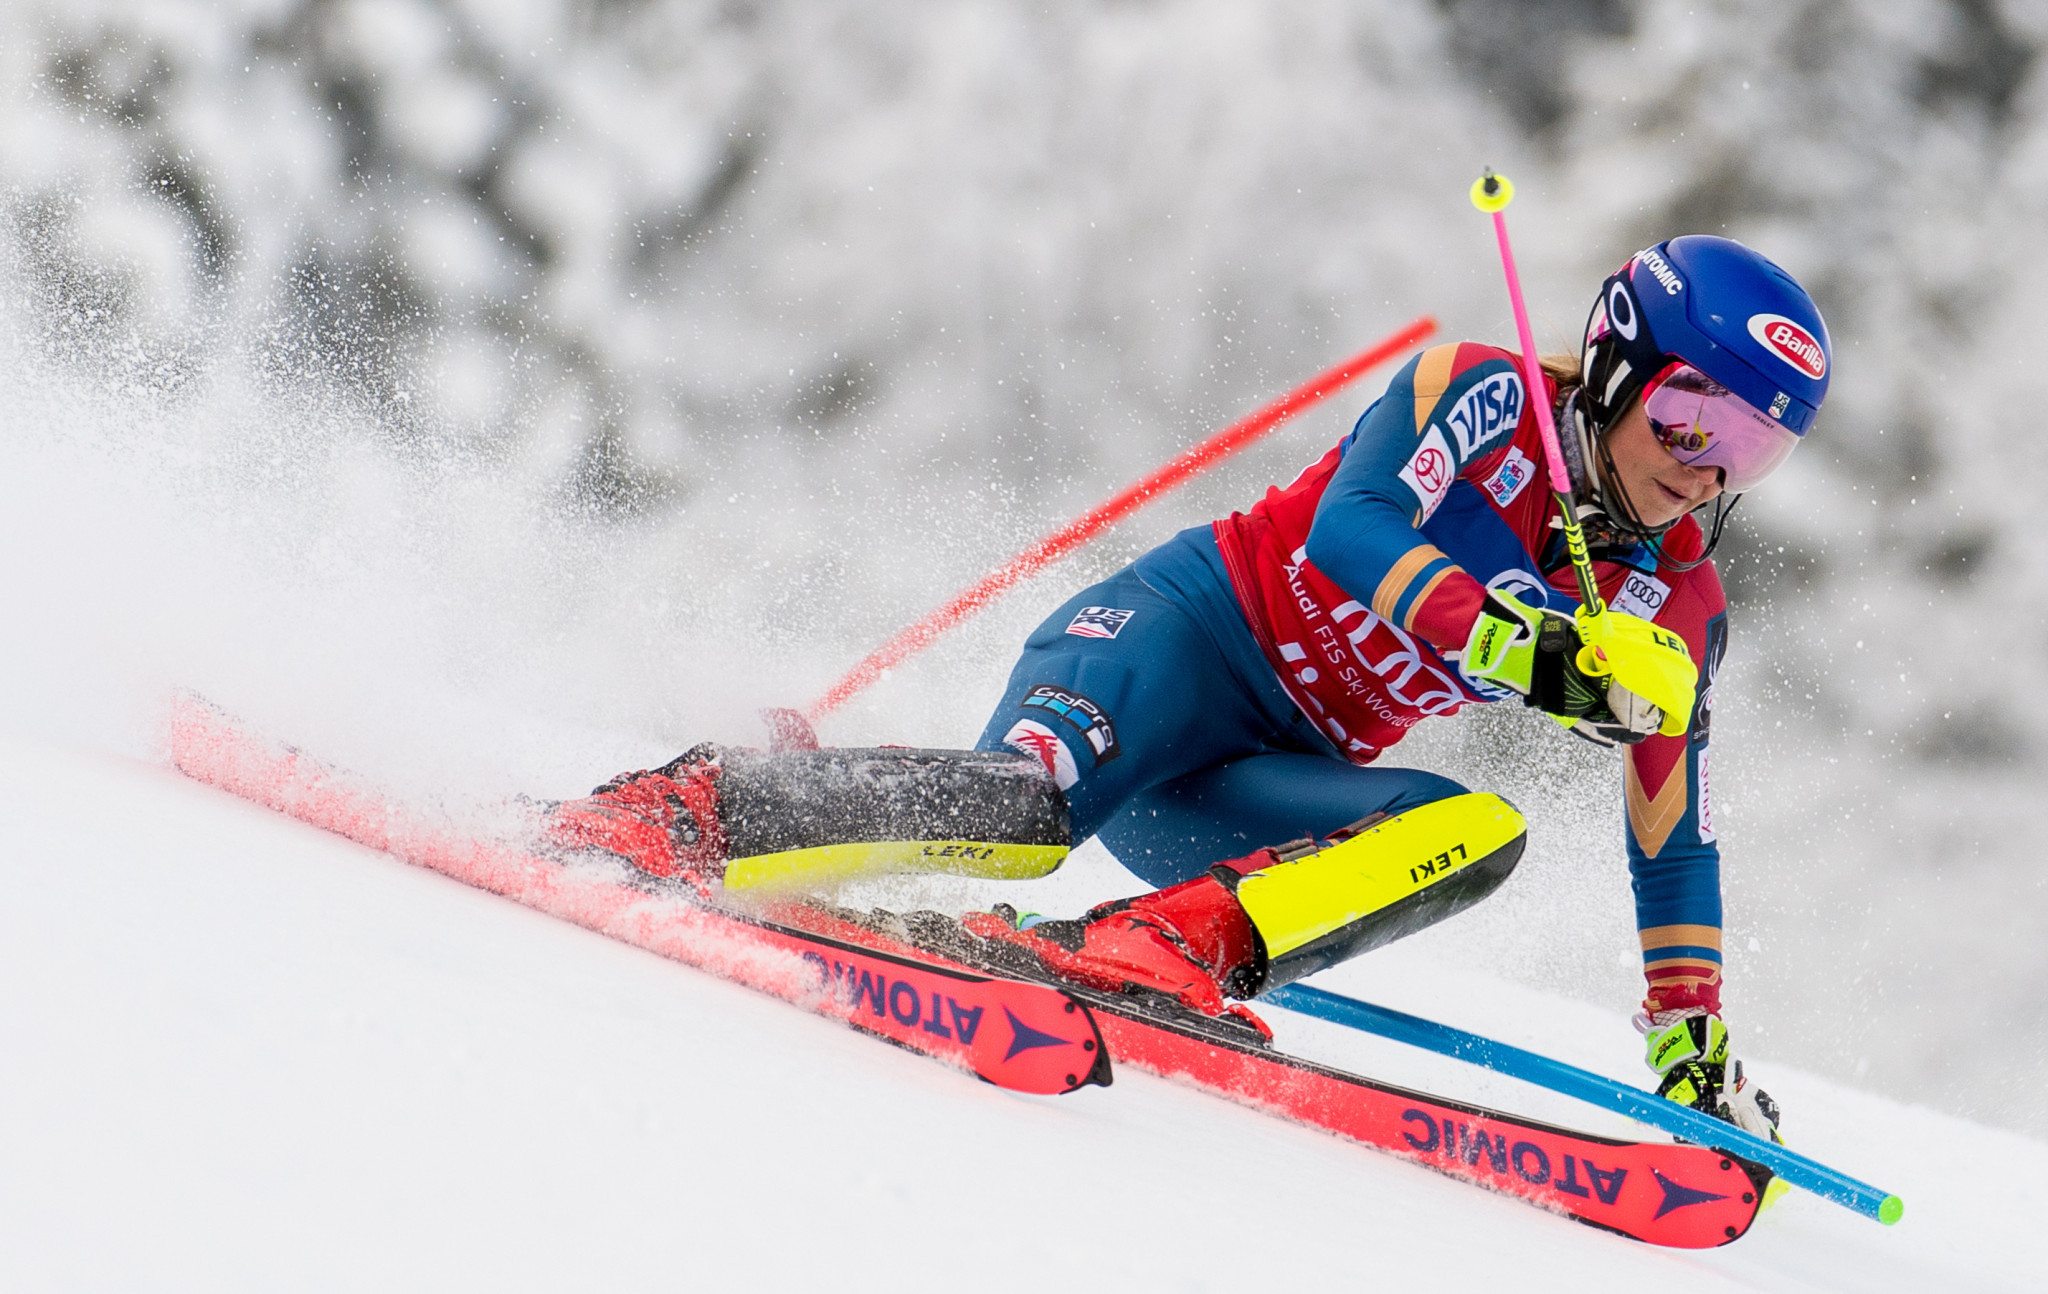 Mikaela Shiffrin continued her superb slalom World Cup form ©Getty Images